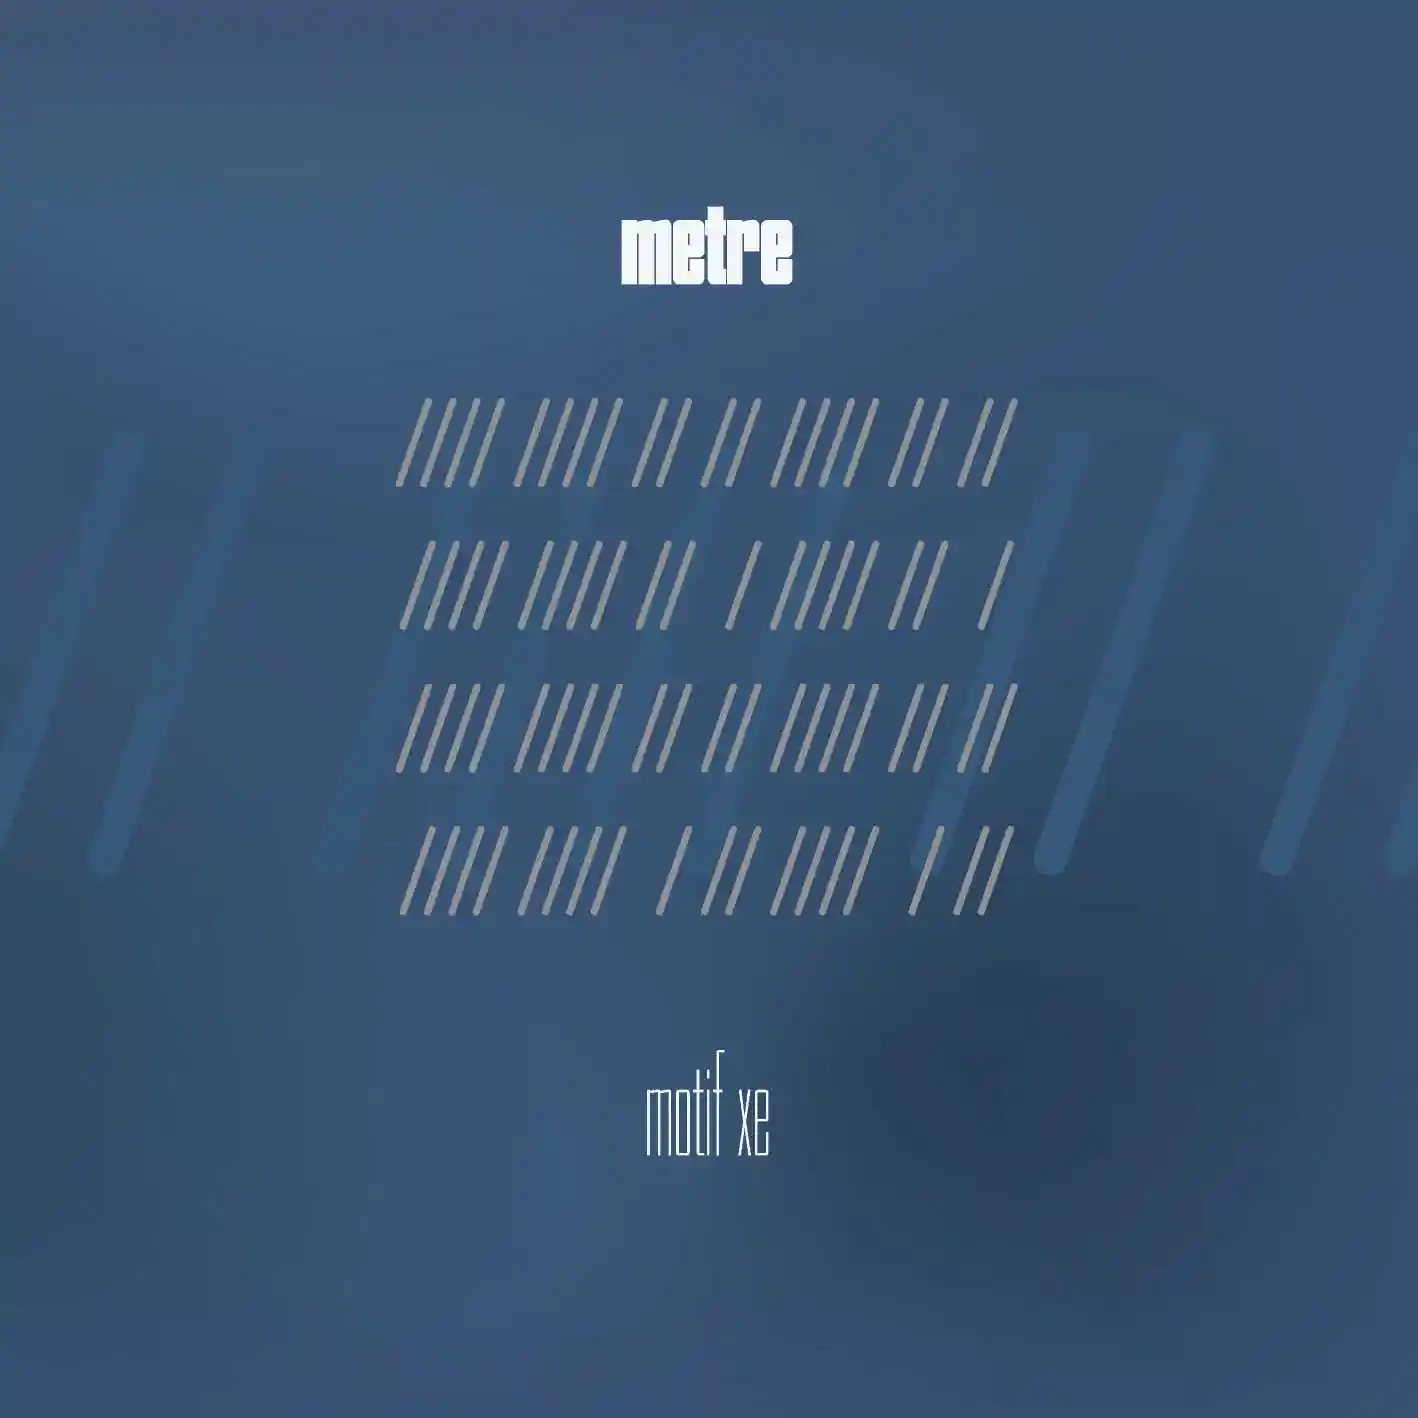 Album cover for “Motif XE” by Metre